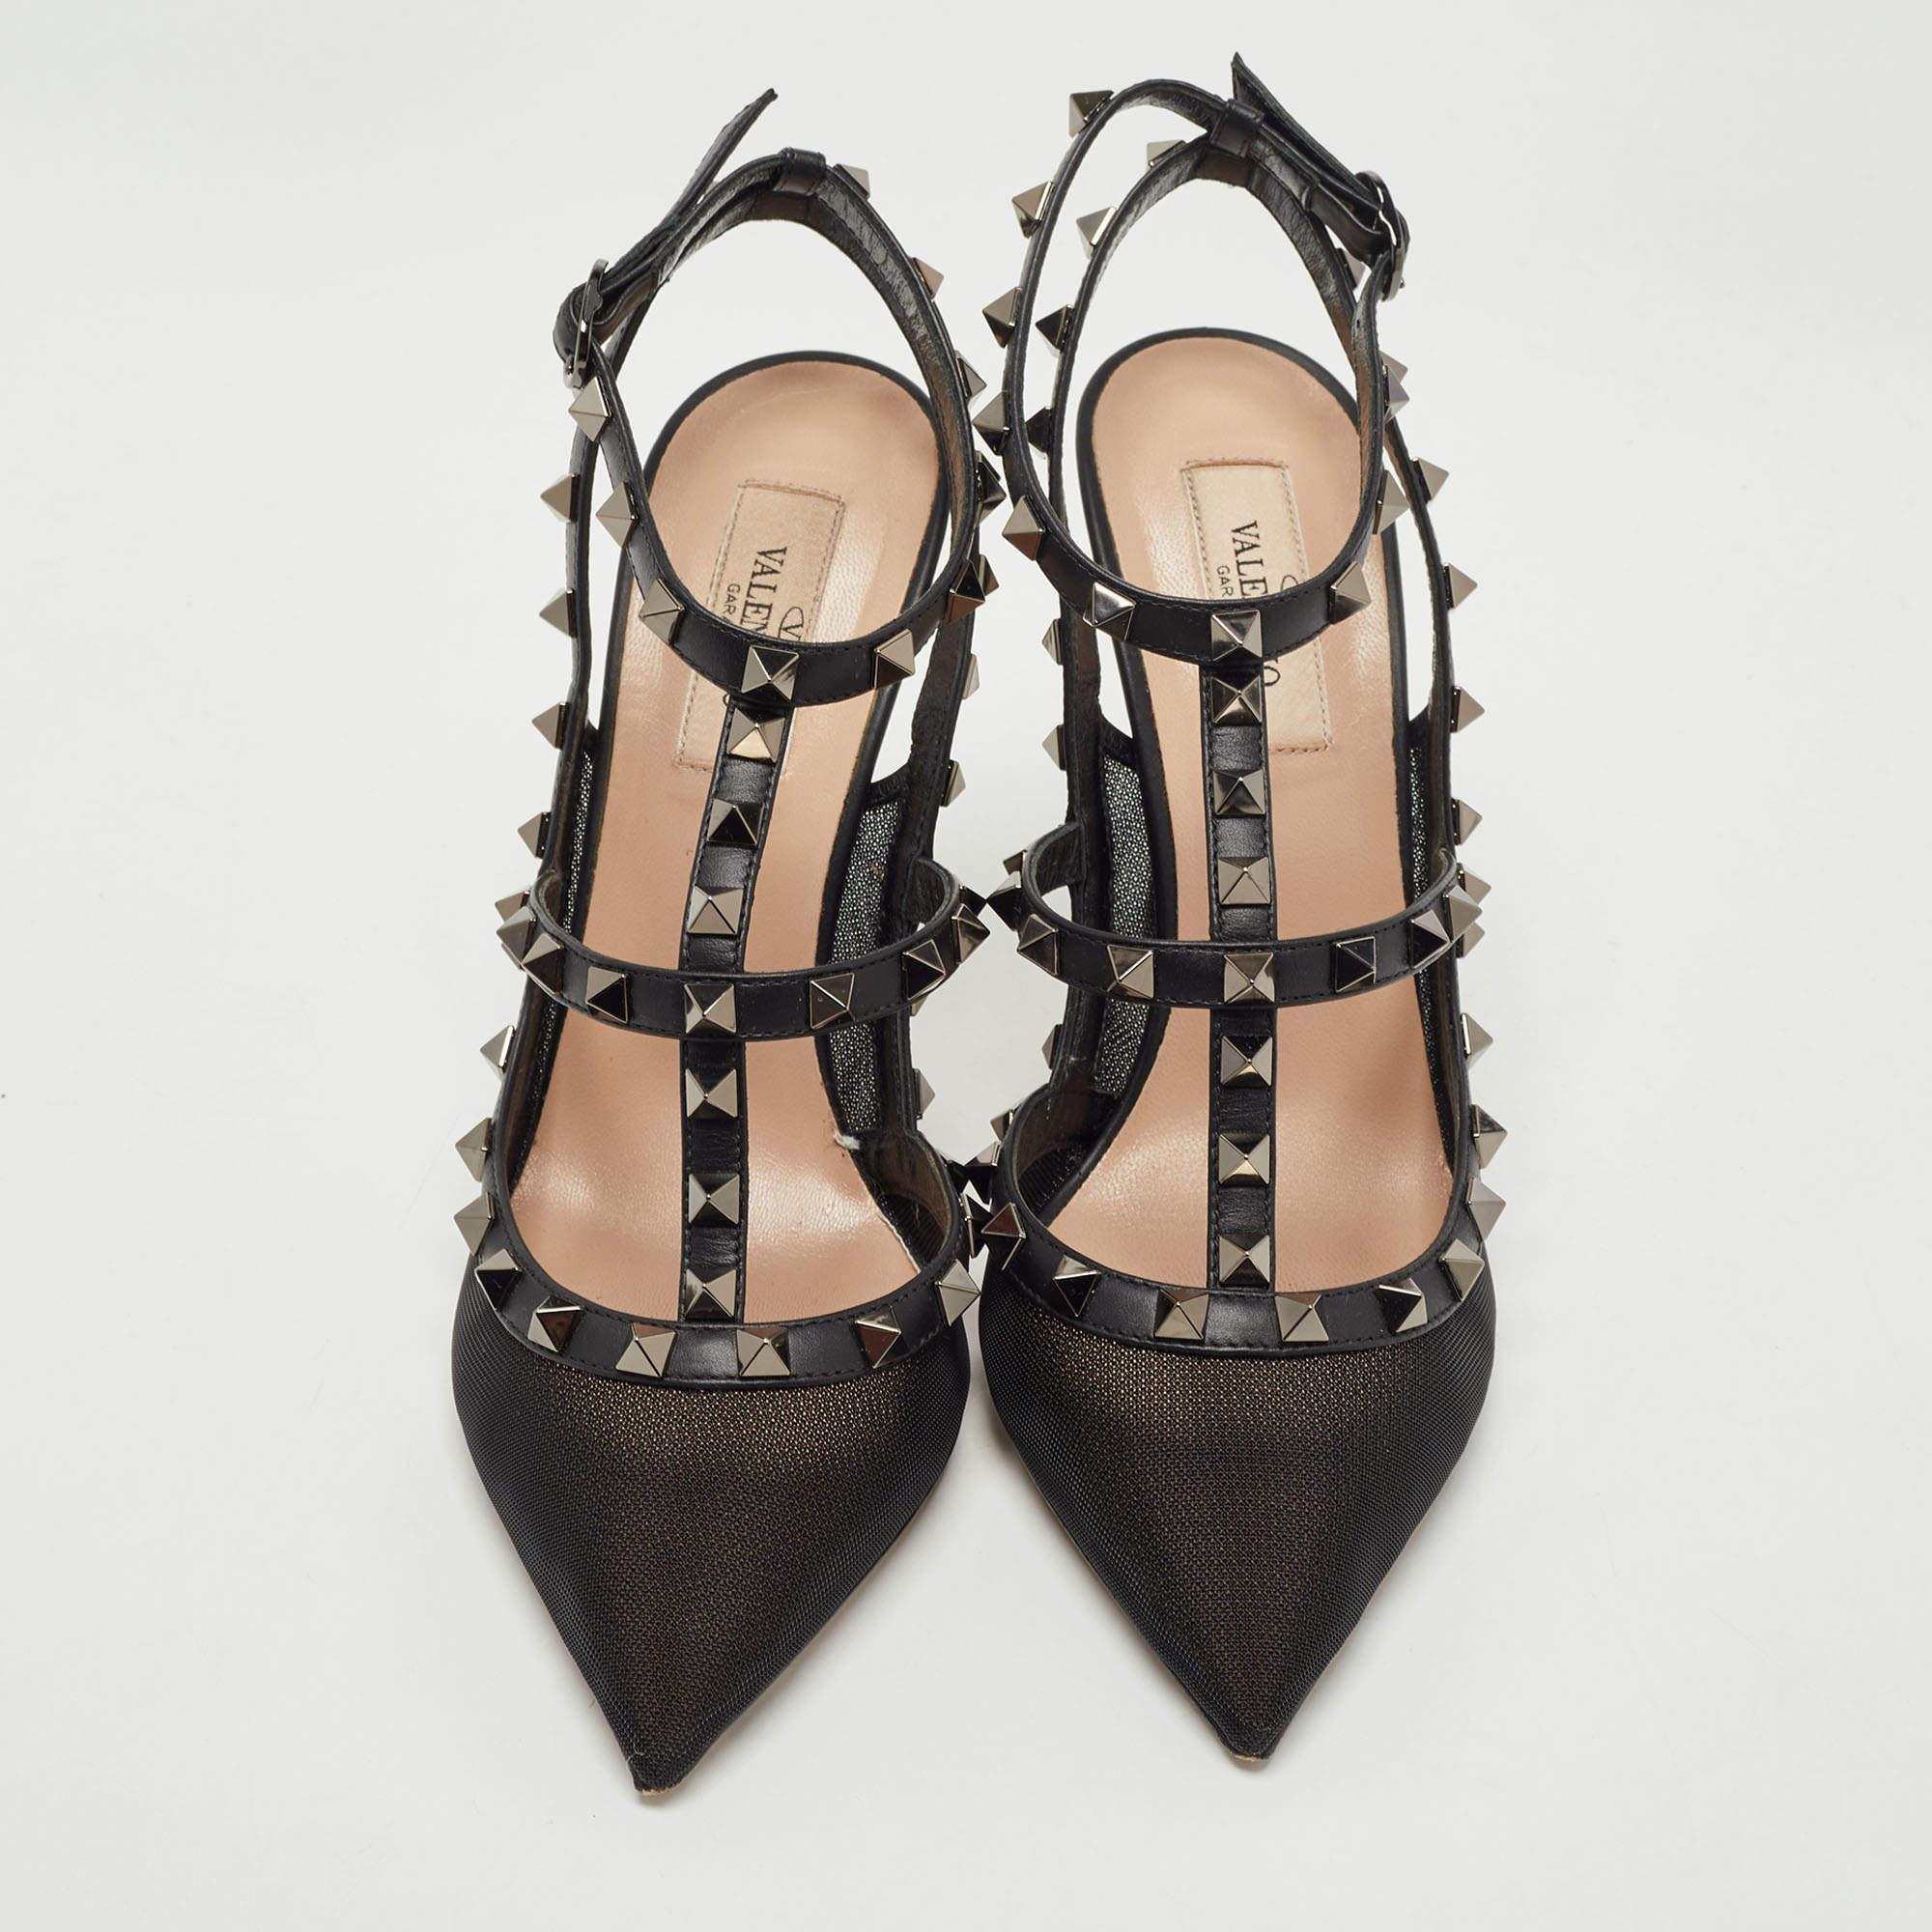 The fashion house’s tradition of excellence, coupled with modern design sensibilities, works to make these Valentino pumps a fabulous choice. They'll help you deliver a chic look with ease.

Includes: Original Dustbag, Original Box, Extra